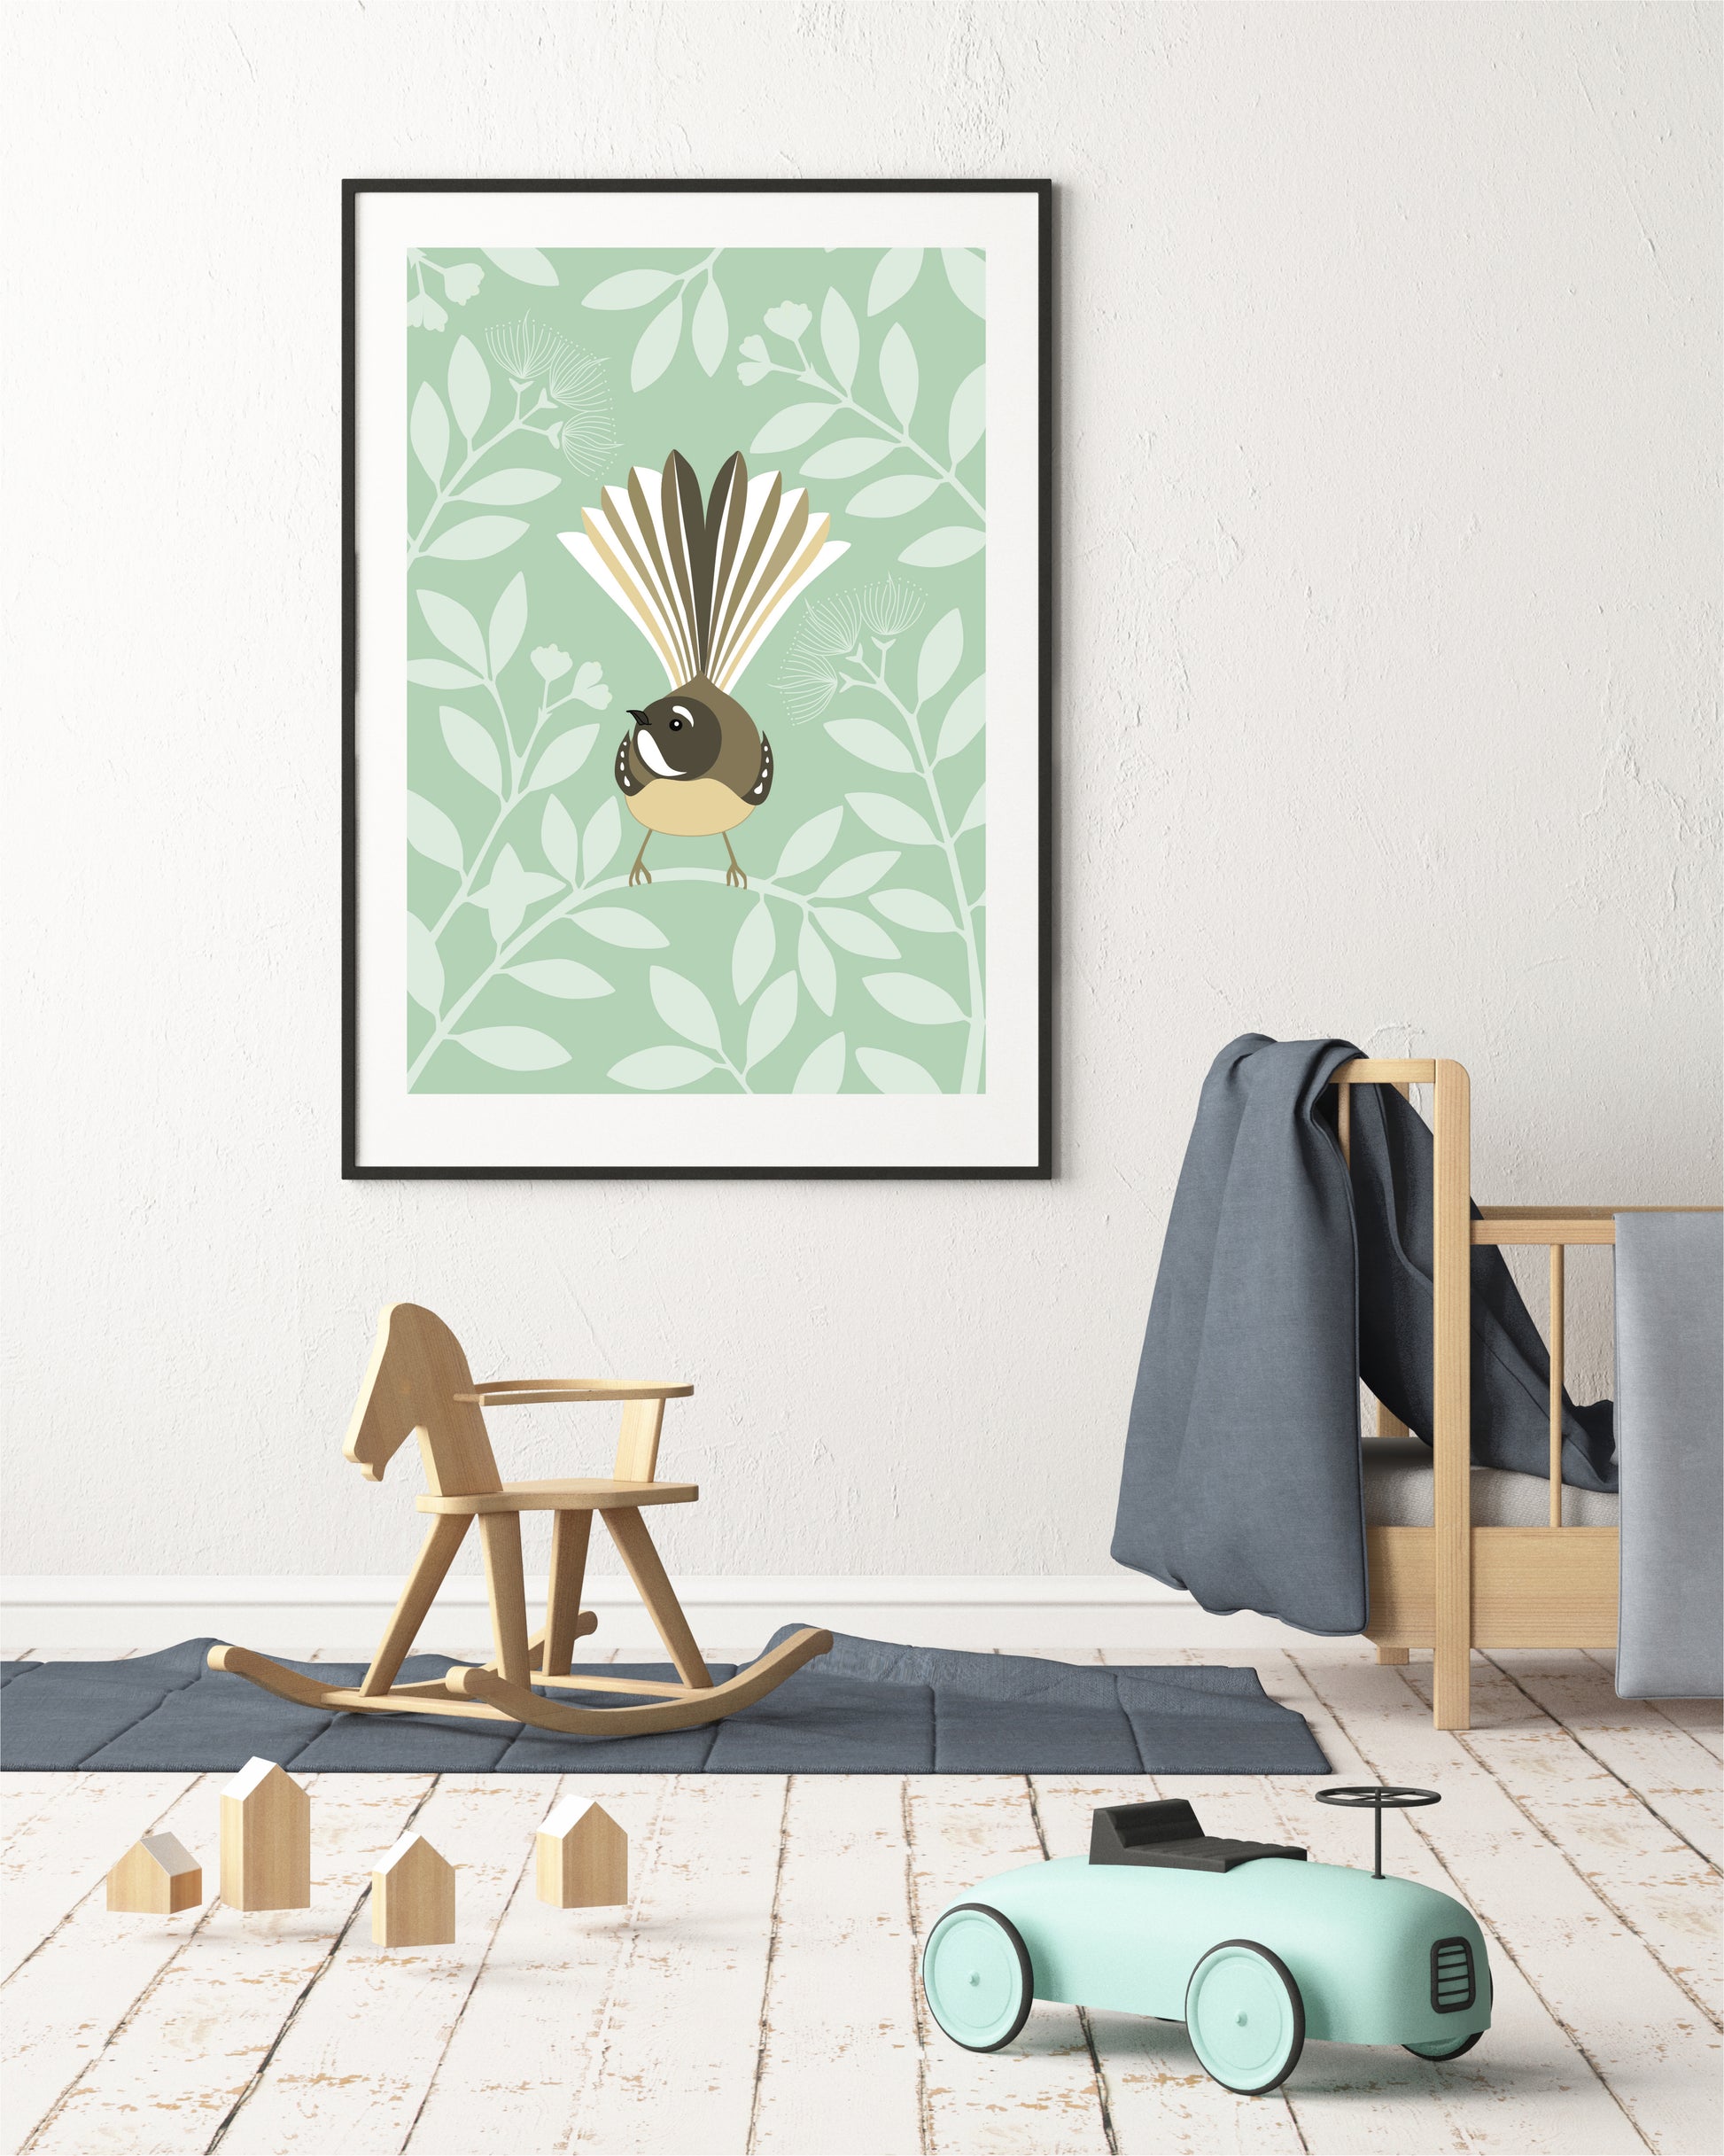 Framed art print of the Fantail bird of New Zealand by Hansby Design 